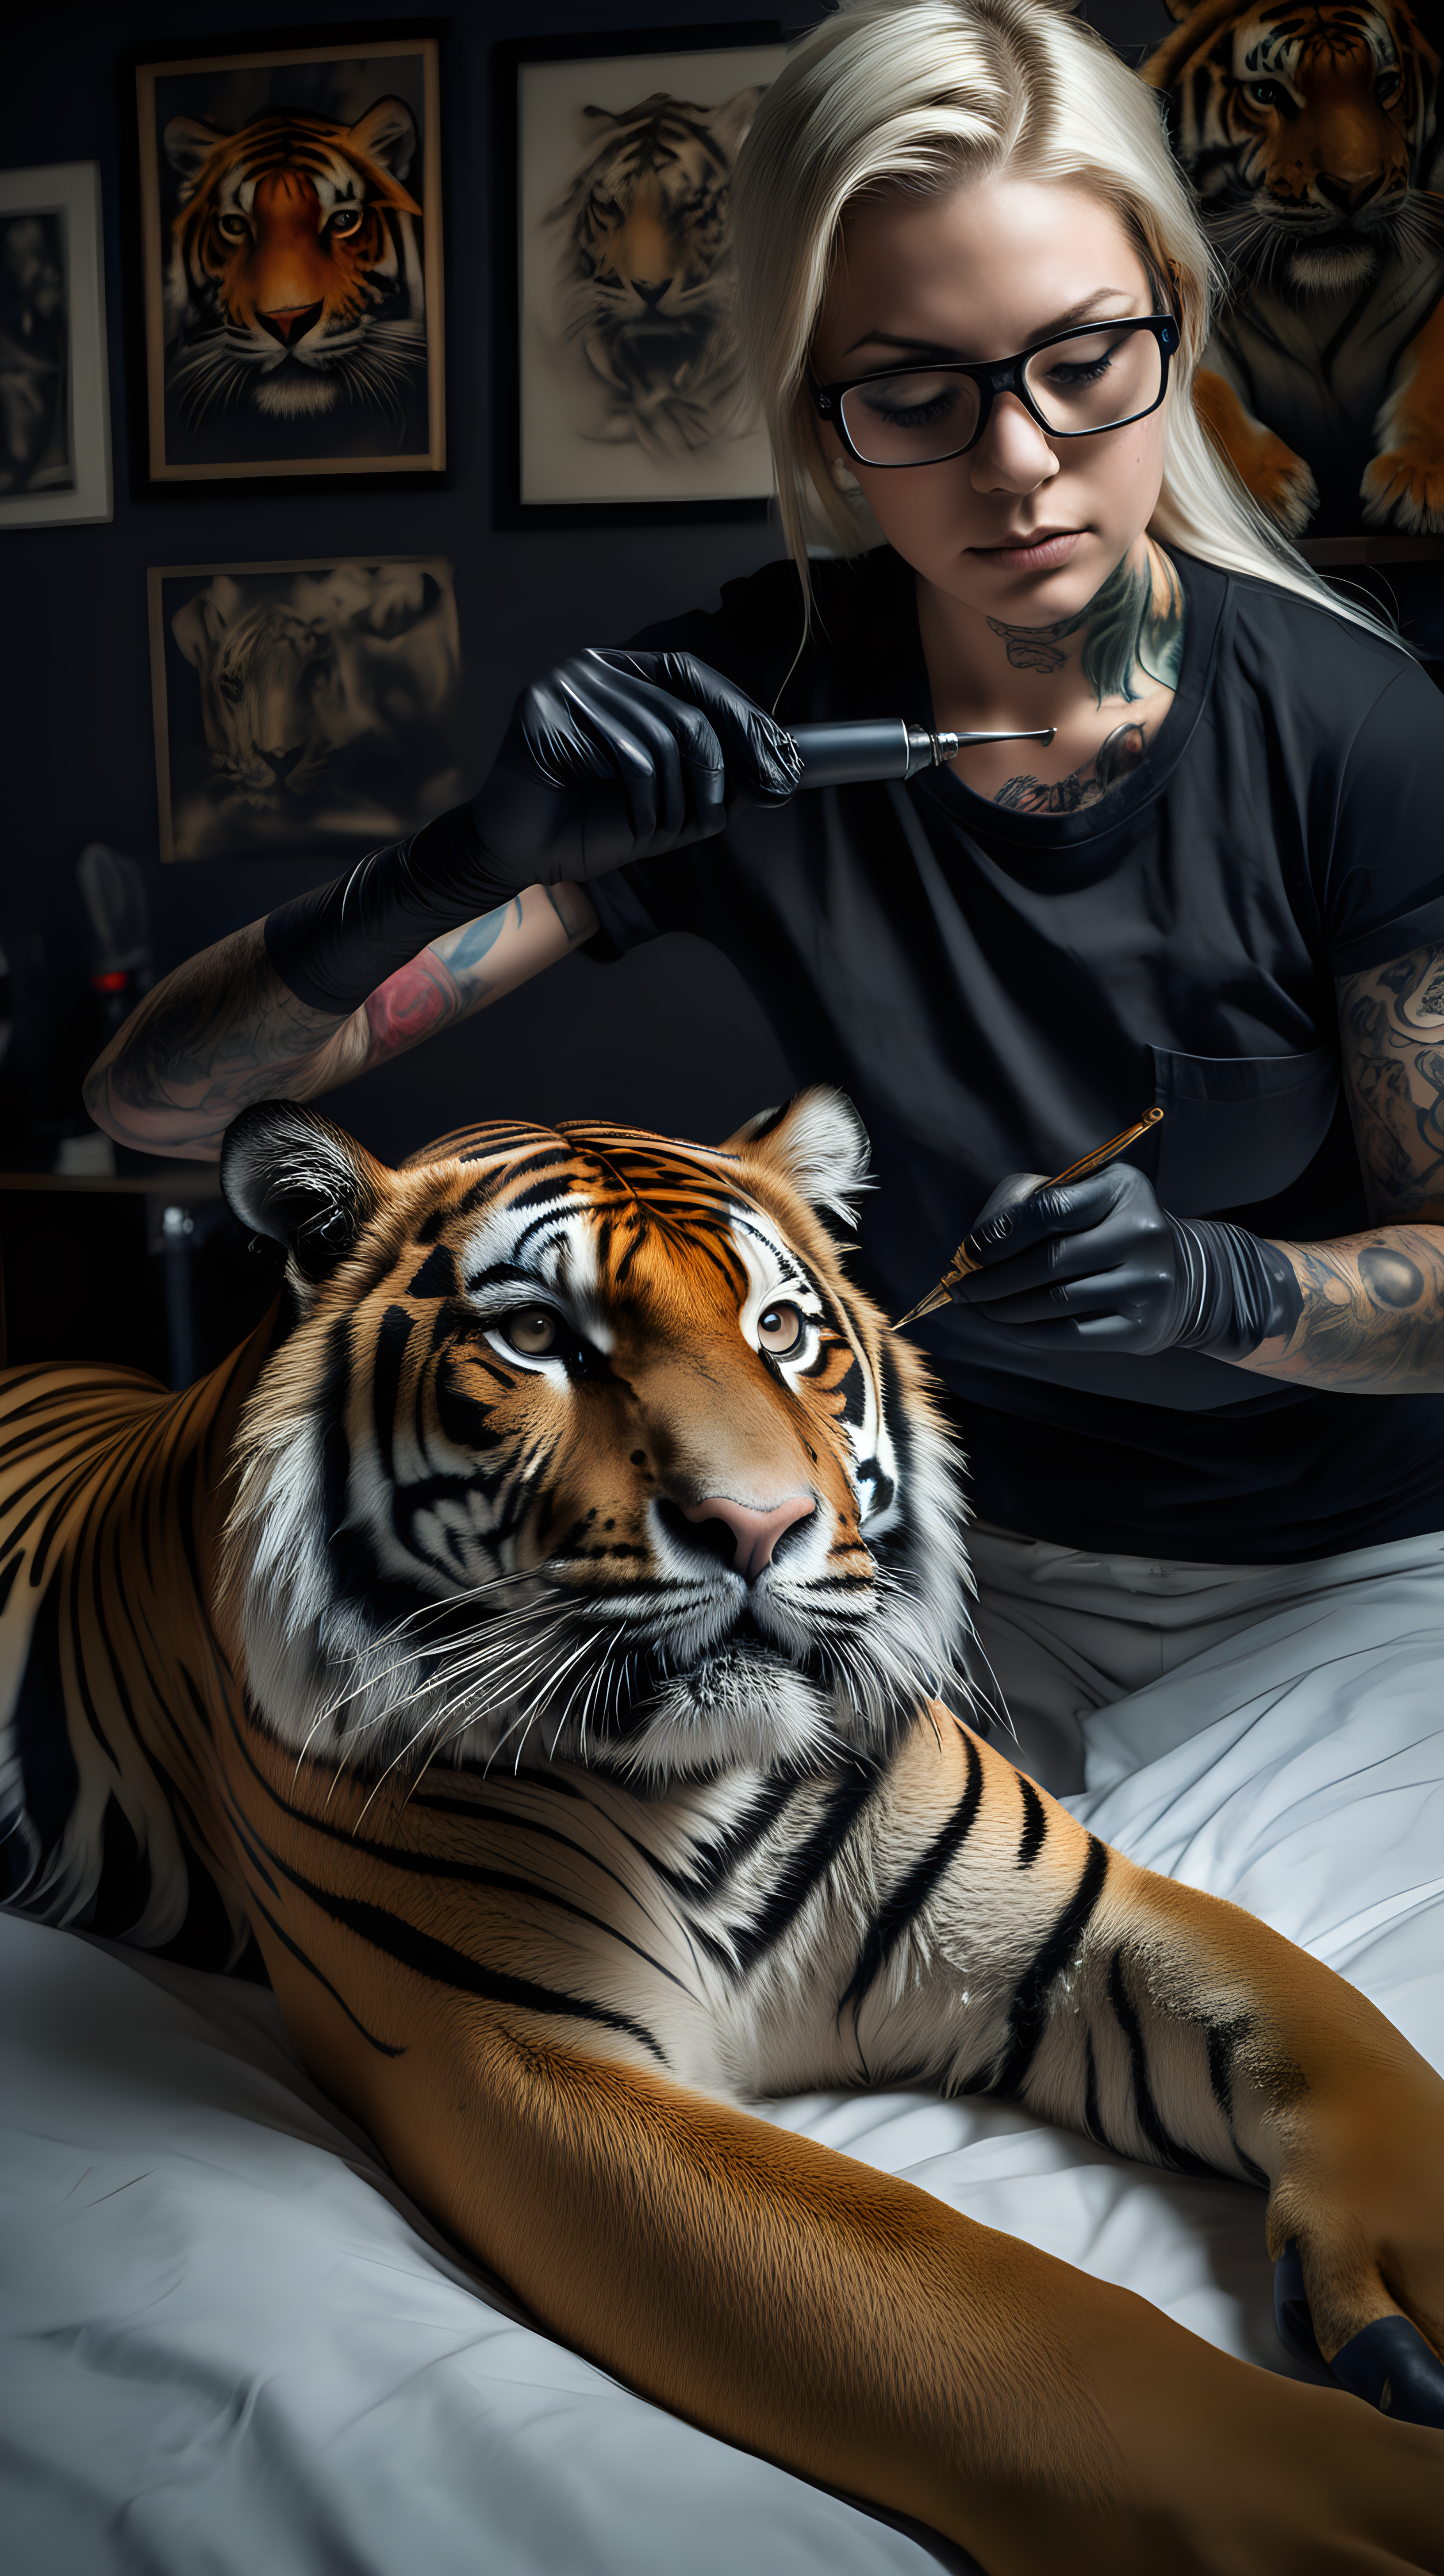 /imagine prompt :An ultra-realistic photograph capturing a sureal Tattoo performance scene. a human tattooing a tiger 
<camera> canon 5d mark III, equipped with an 85 lens at F 5.8 aperture setting
<location> a  tattoo studio beside an crowed street
<light> Soft spot light gracefully illuminates the subject’s body, casting a dreamlike glow.
/describe : a beautiful  woman that she is a tattoo artist with glasses and black shirt ,has black nitrile gloves, has a black surgical mask, seated beside the  client bed, tattooing on a real wild tiger's body! a golden tattoo machine in his hand.
–no tattoos on head 
 woman  has natural beauty with beautiful blonde short hair  .
a real tiger laid gently on tattoo client's bed same as a tattoo client to taking tattoo on its body creating a sureal scene.
The background is black , absolutely blurred, highlighting the subjects.
The image, shot in high resolution and a 16:9 aspect ratio, captures the subject’s natural beauty and personality with stunning realism

–ar 9:16 –v 5.2 –style raw
